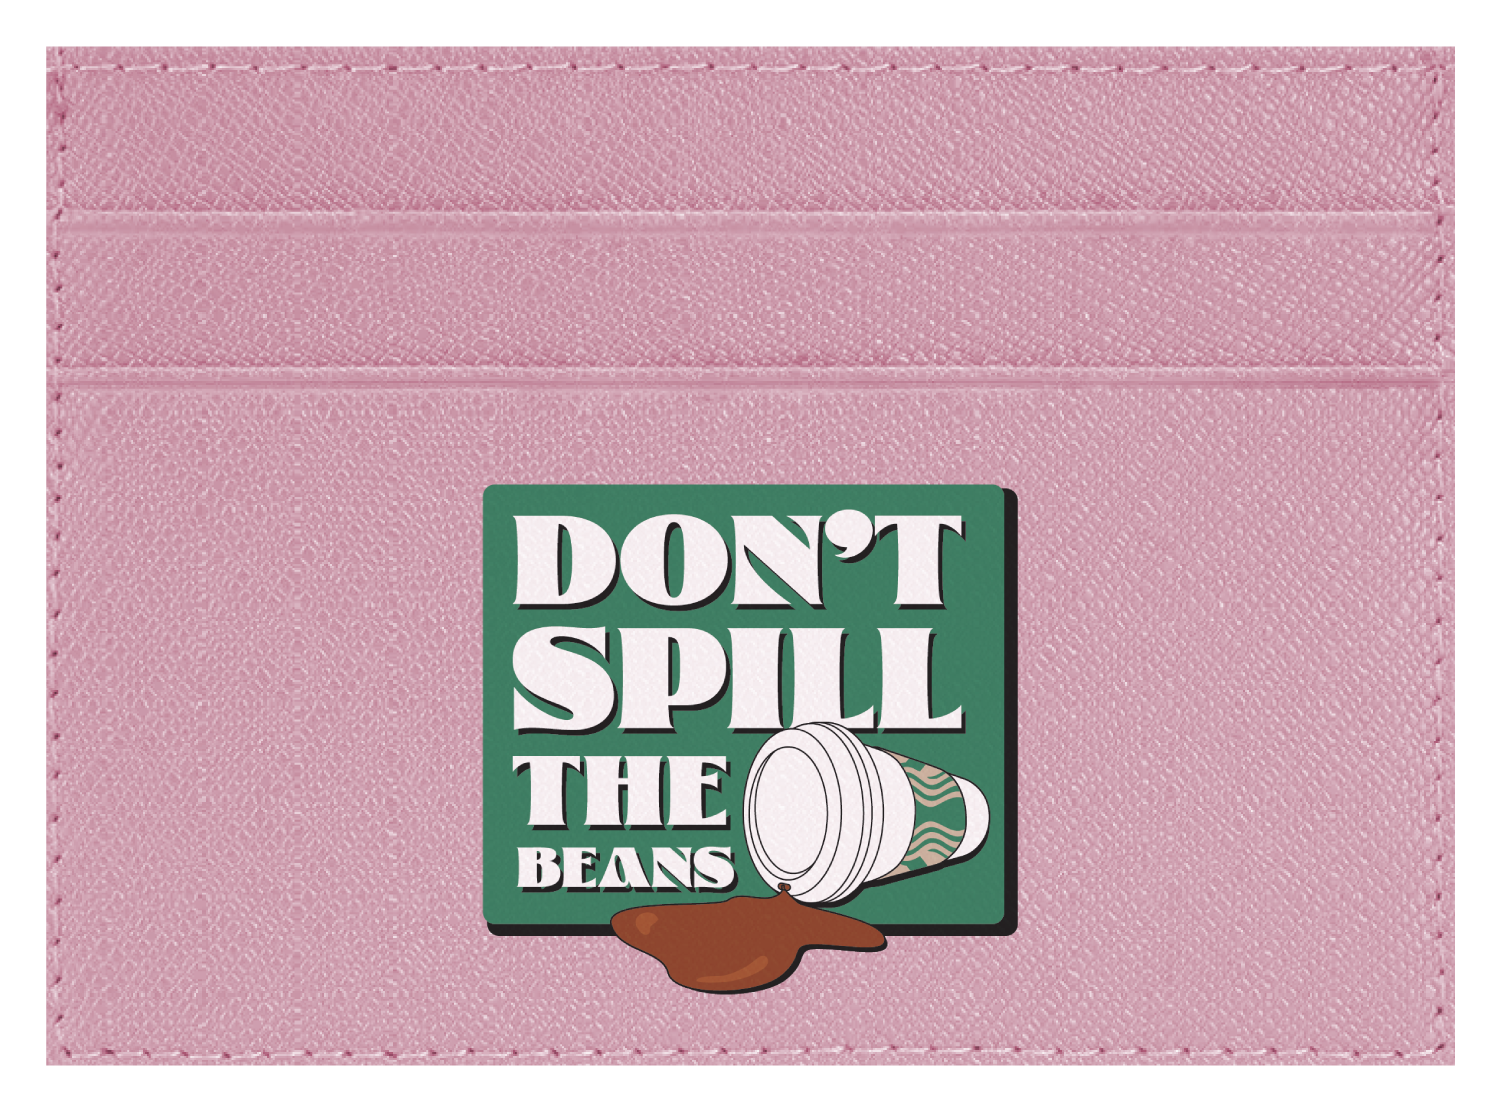 Don't spill the beans